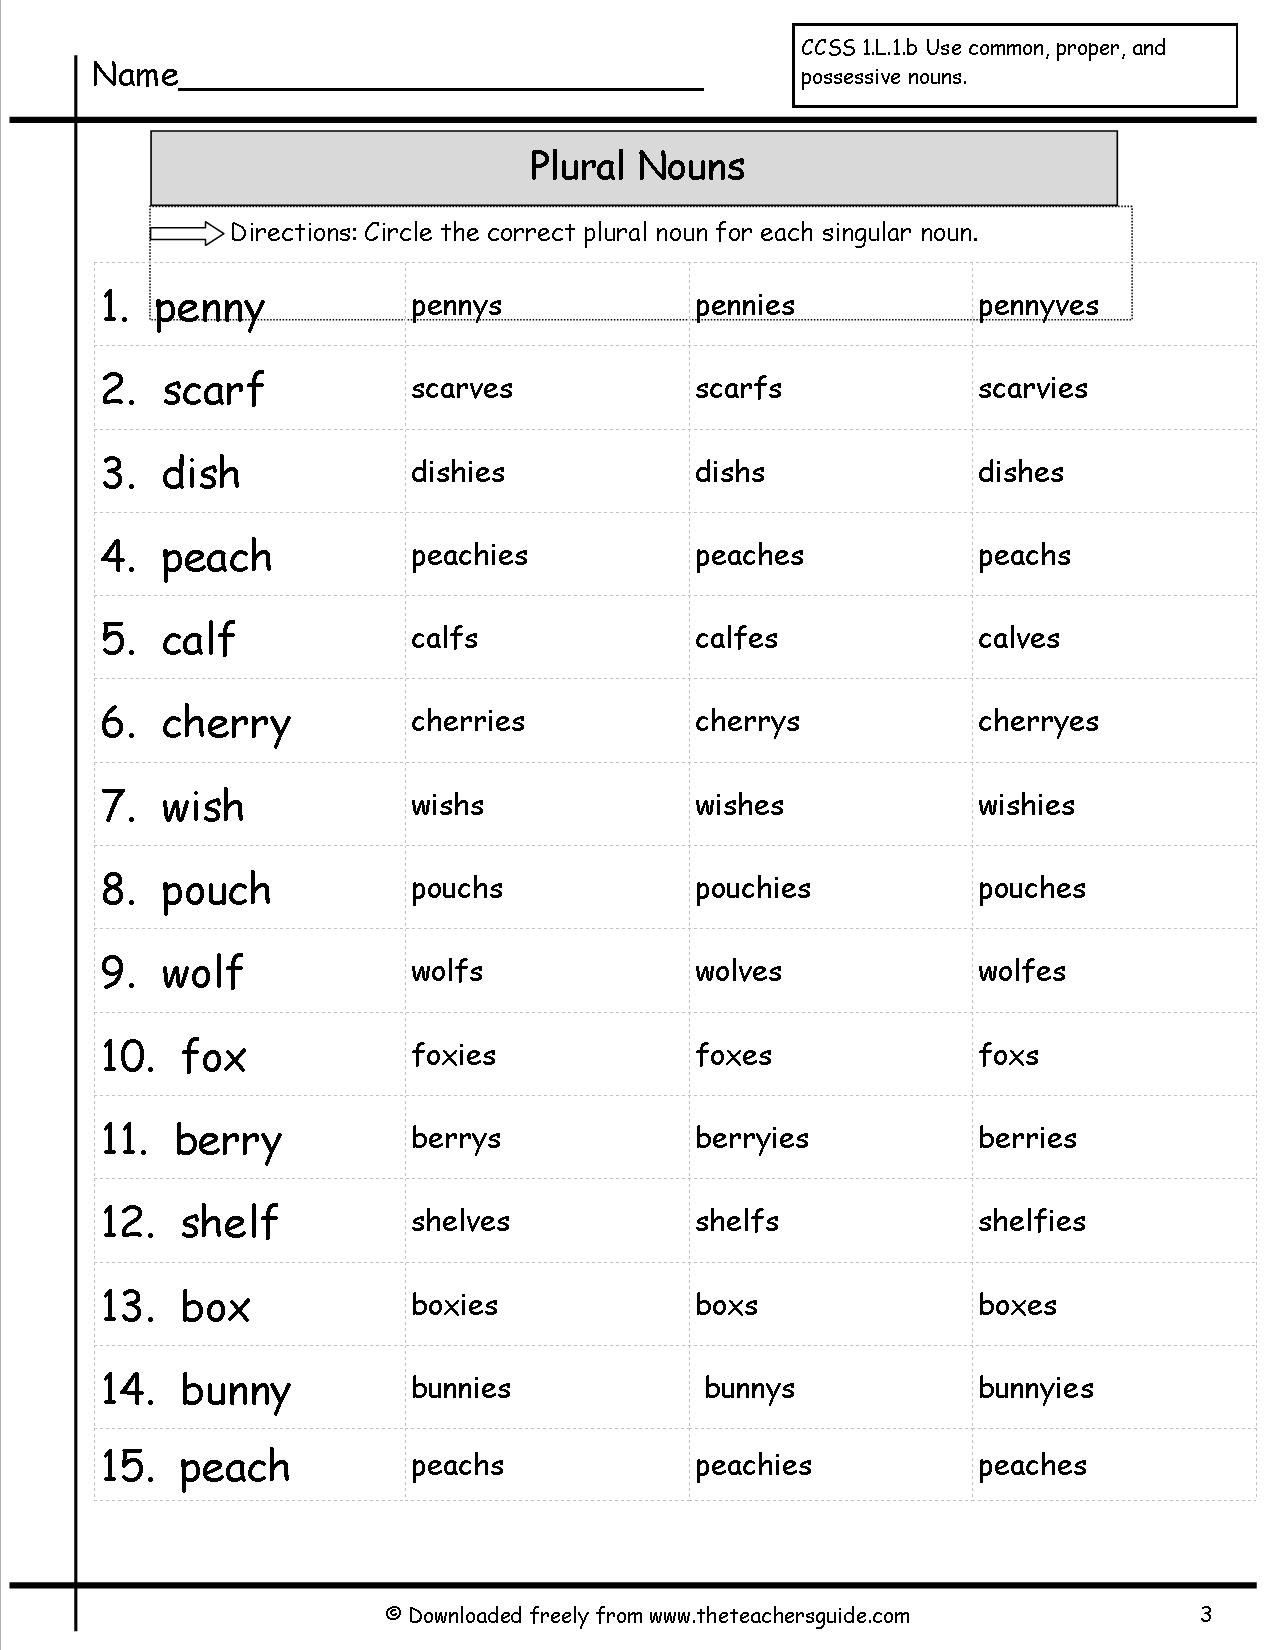 15-best-images-of-nouns-and-verbs-worksheets-sentences-identify-noun-and-verb-worksheet